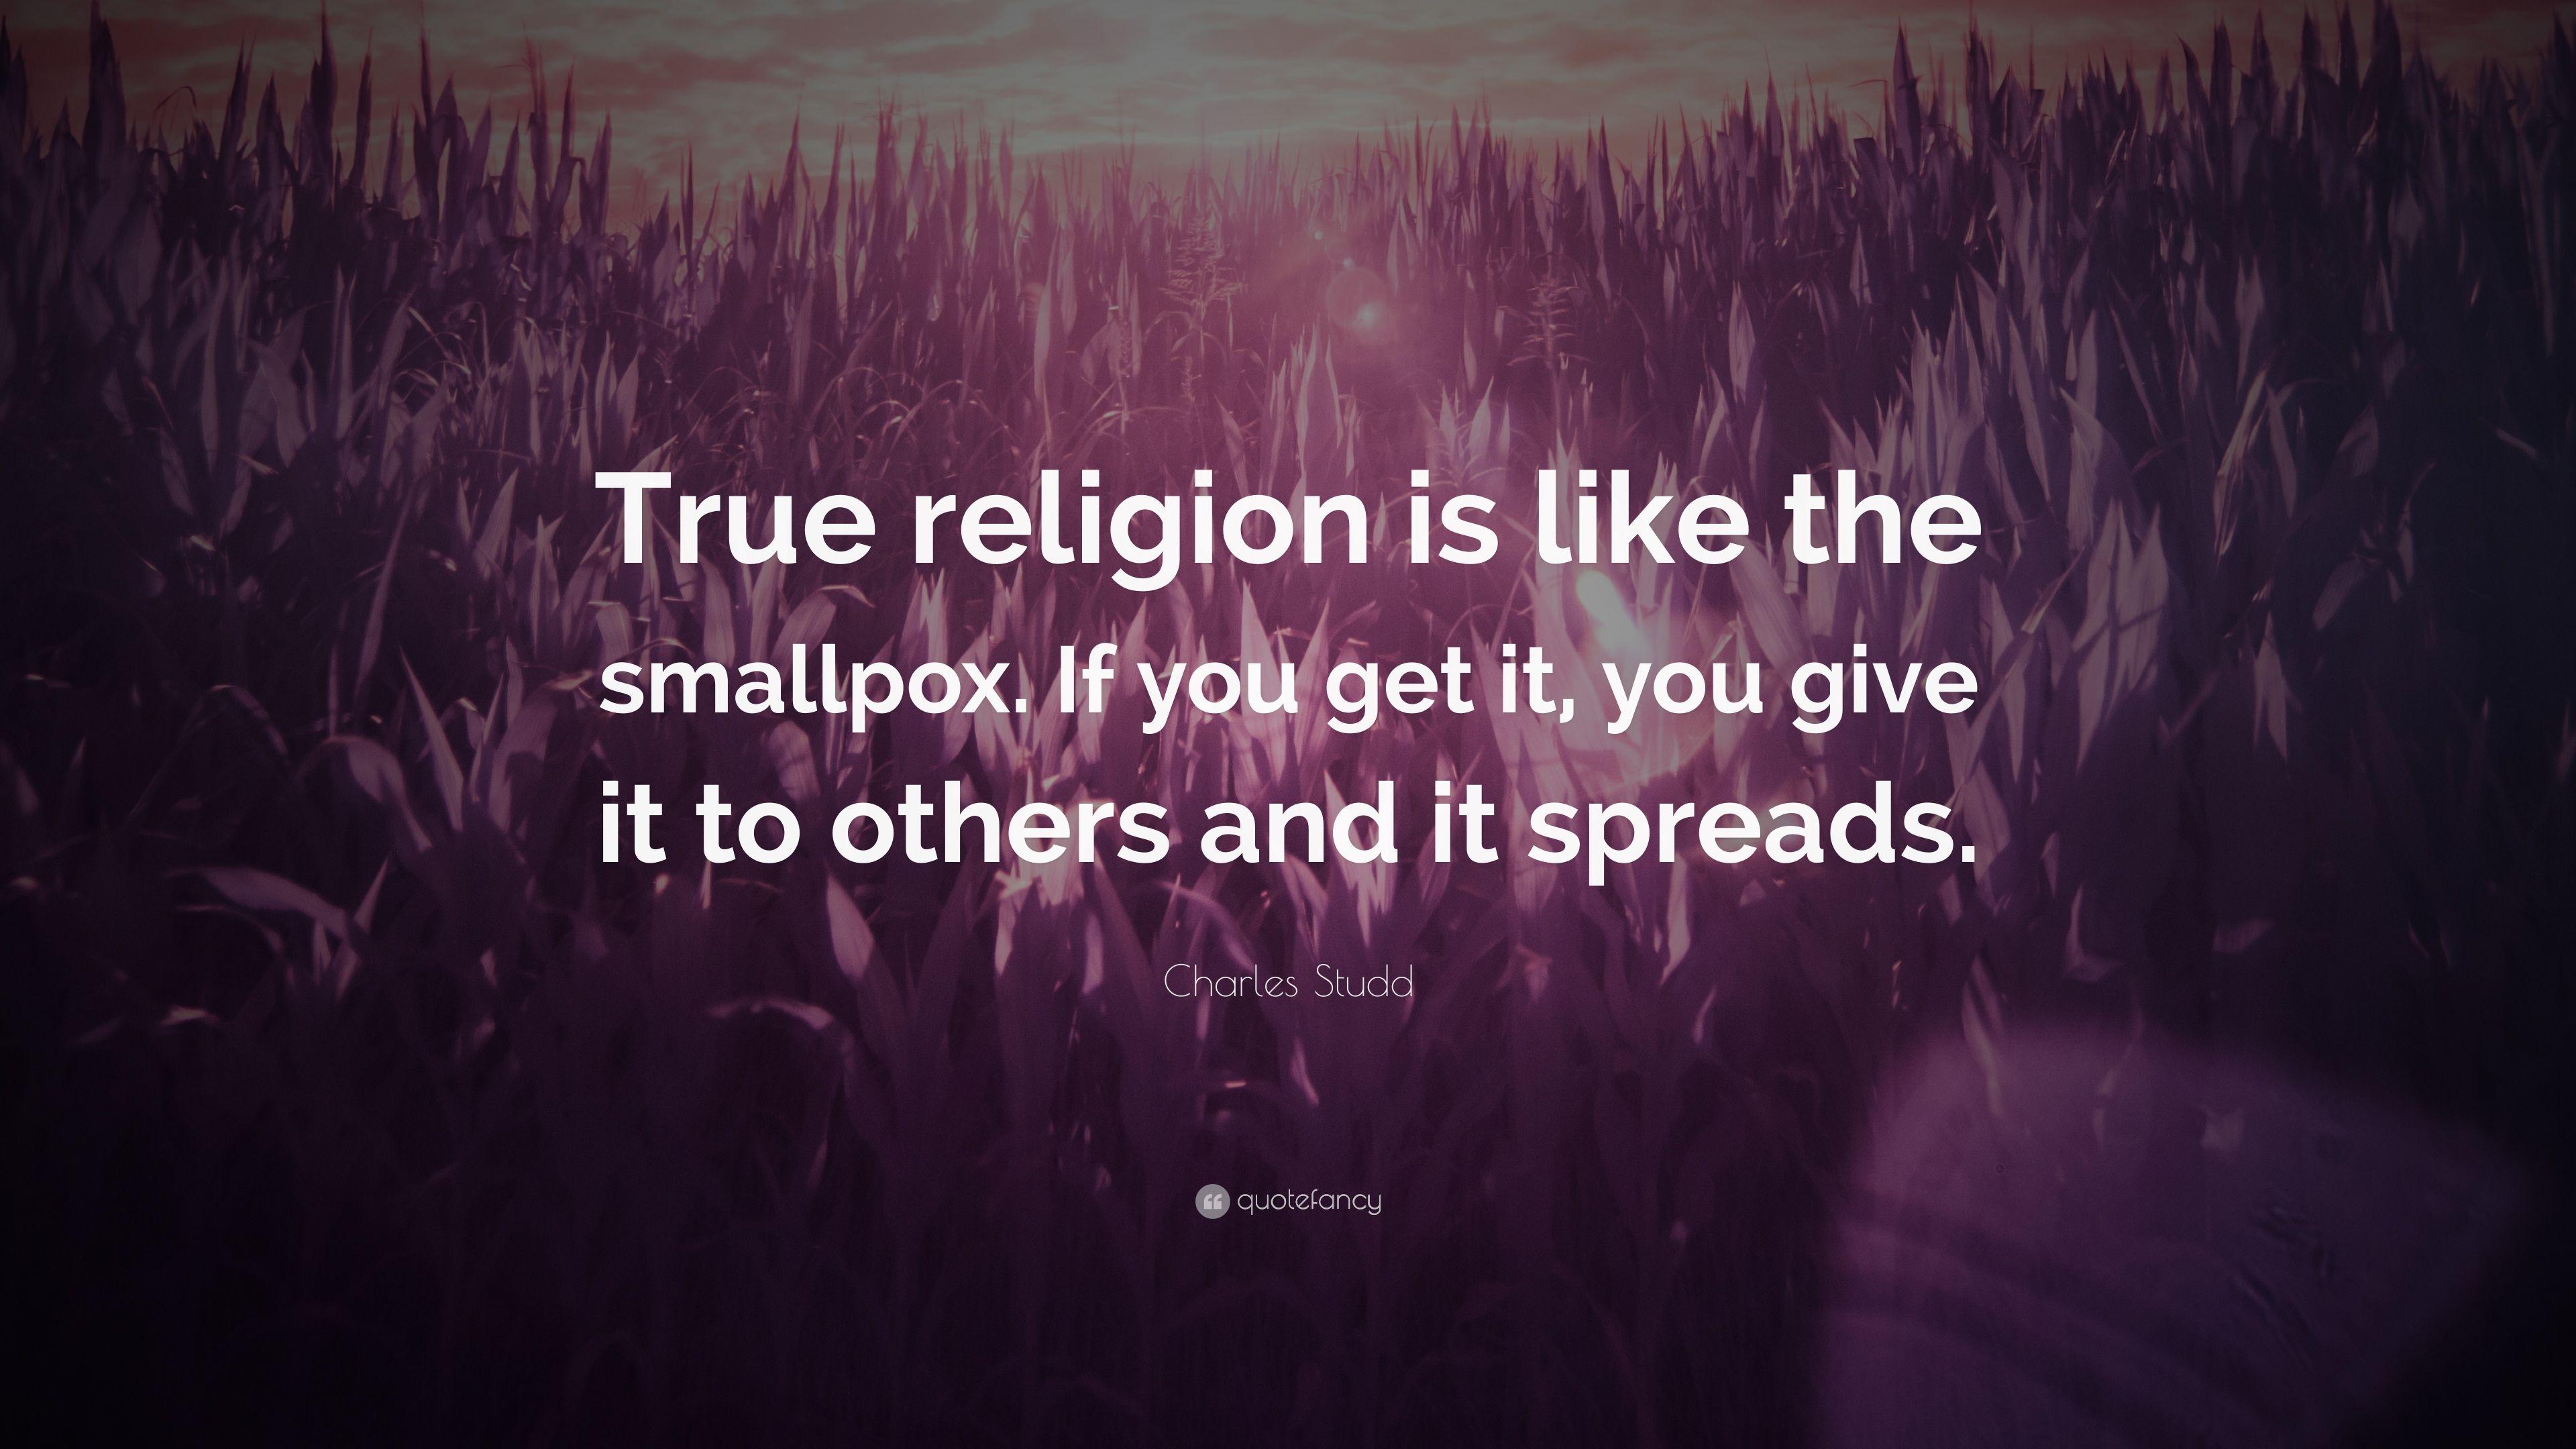 Charles Studd Quote: “True religion is like the smallpox. If you